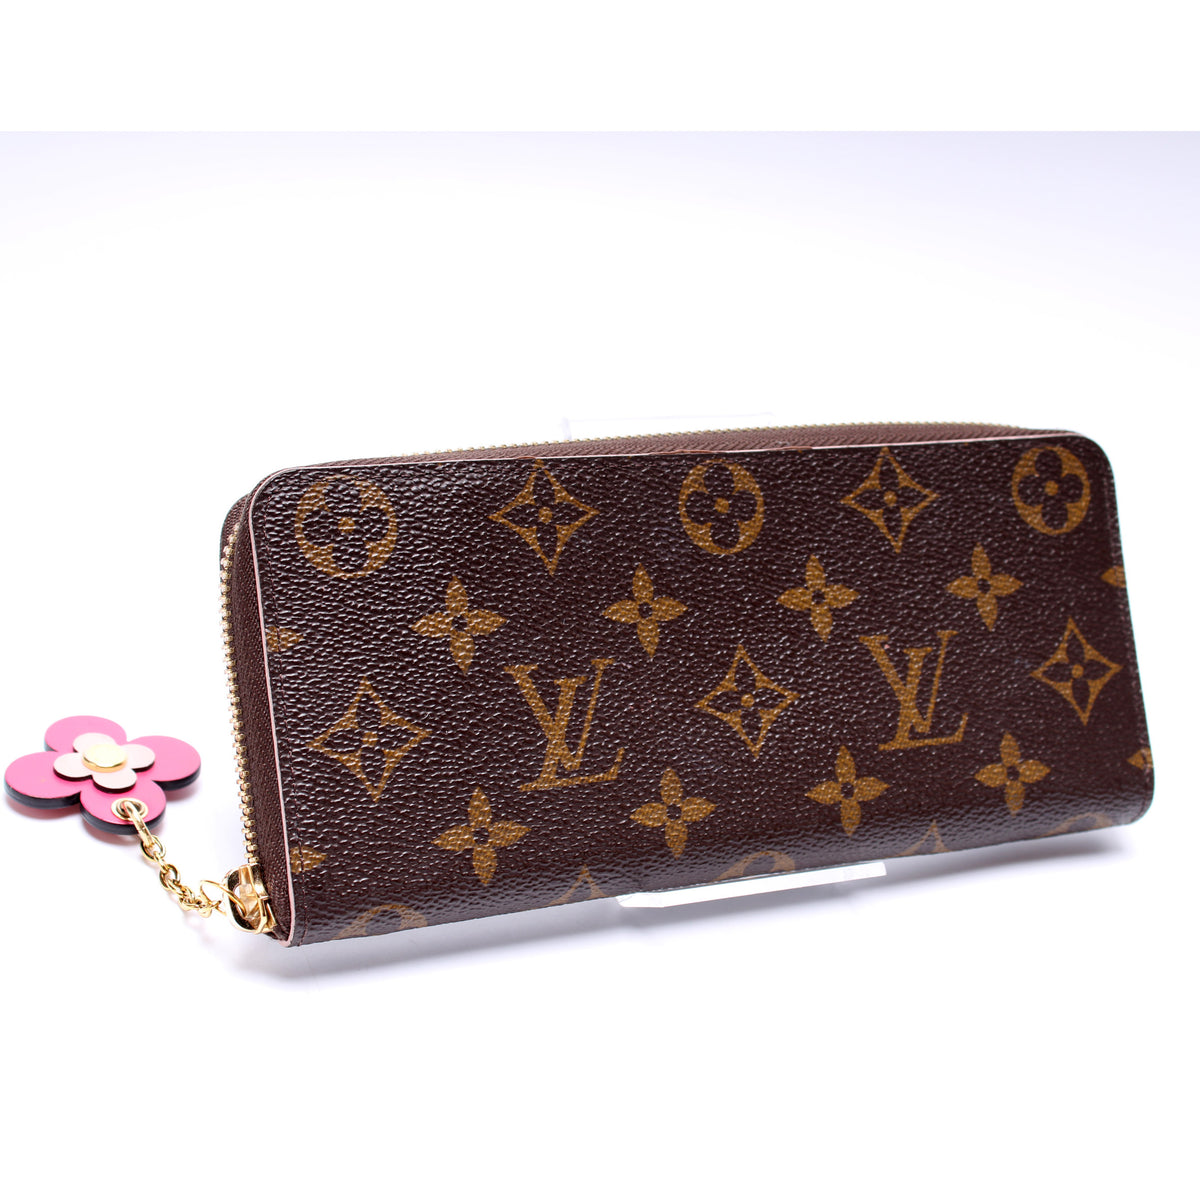 100% Authentic Louis Vuitton Small Monogram Zip Wallet Made In